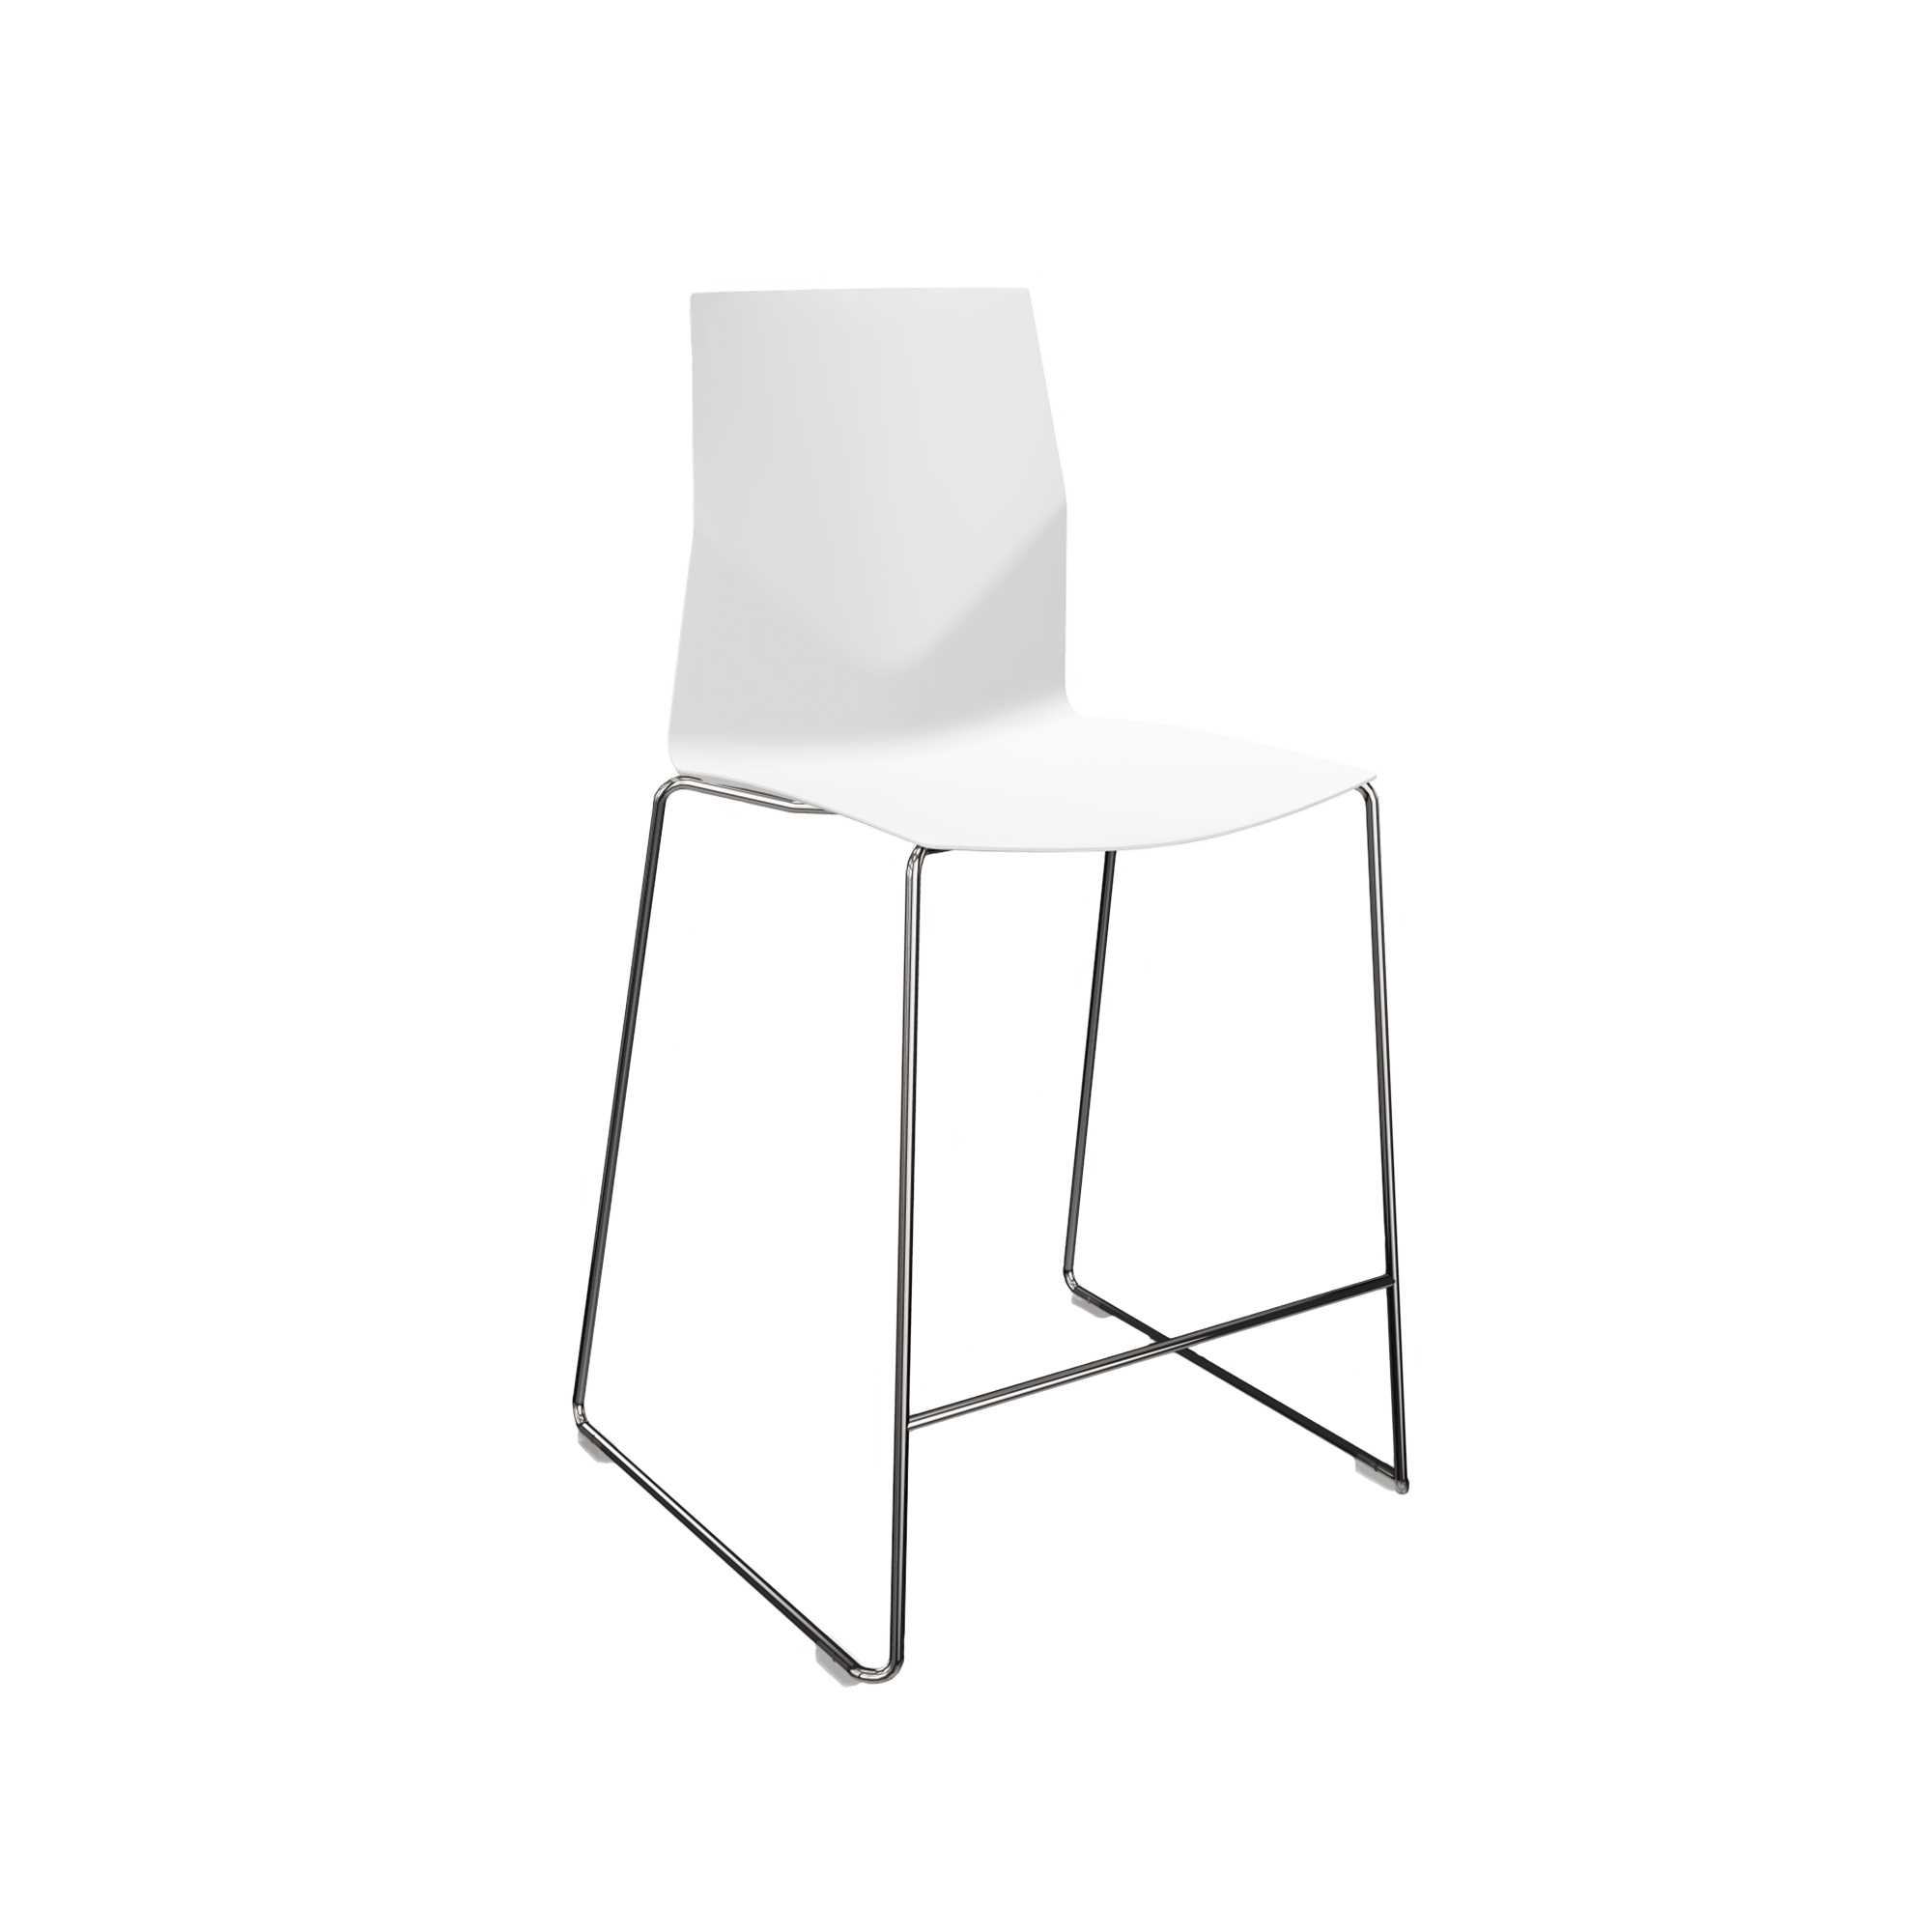 A mid height counter chair with two chrome legs and a white seat